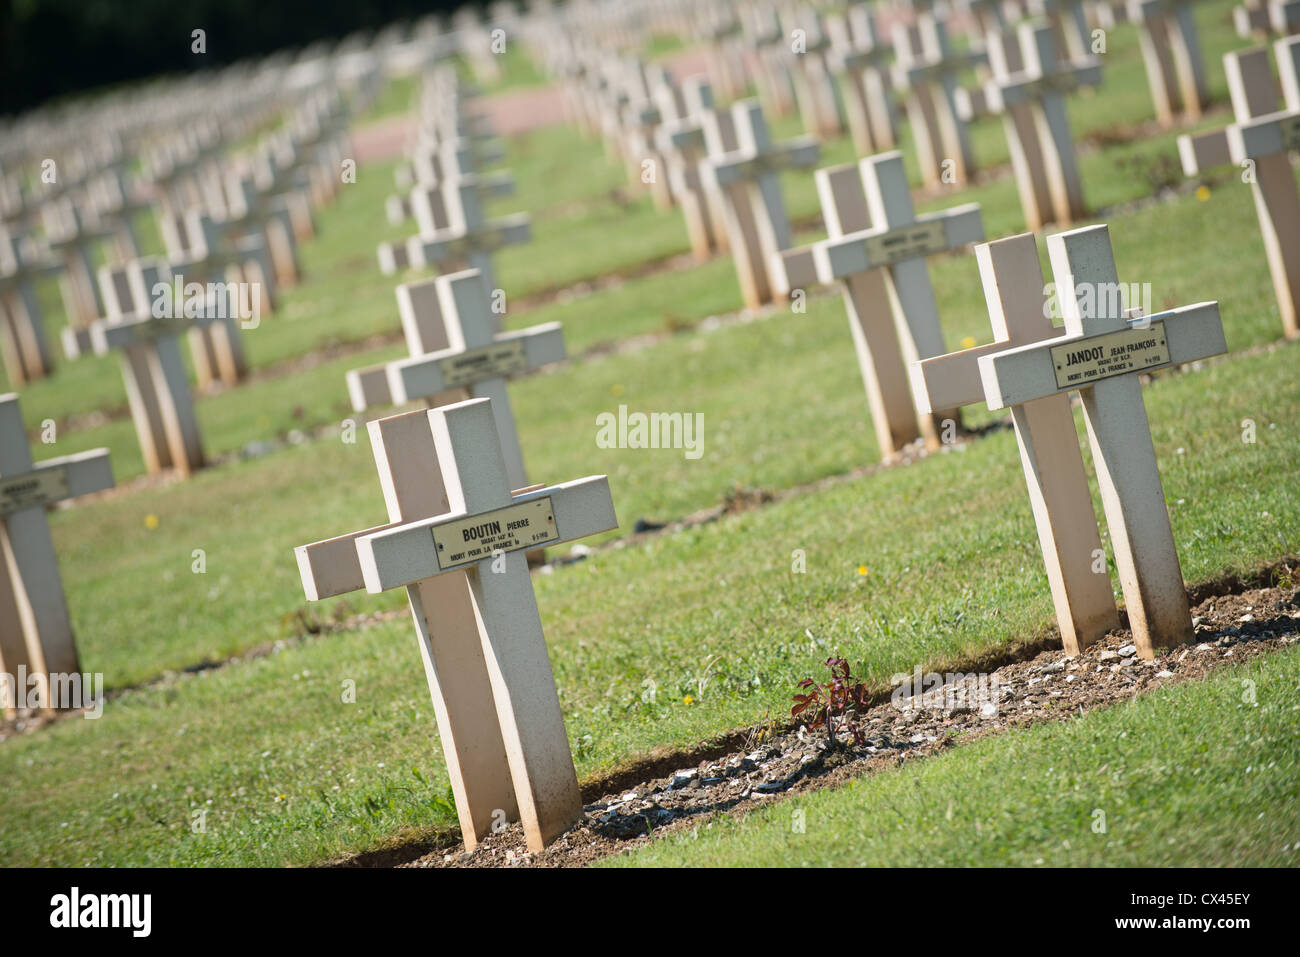 Grave markers at Albain St Nazaire (Notre Dame de Lorette) the Trench national WW1 memorial Stock Photo